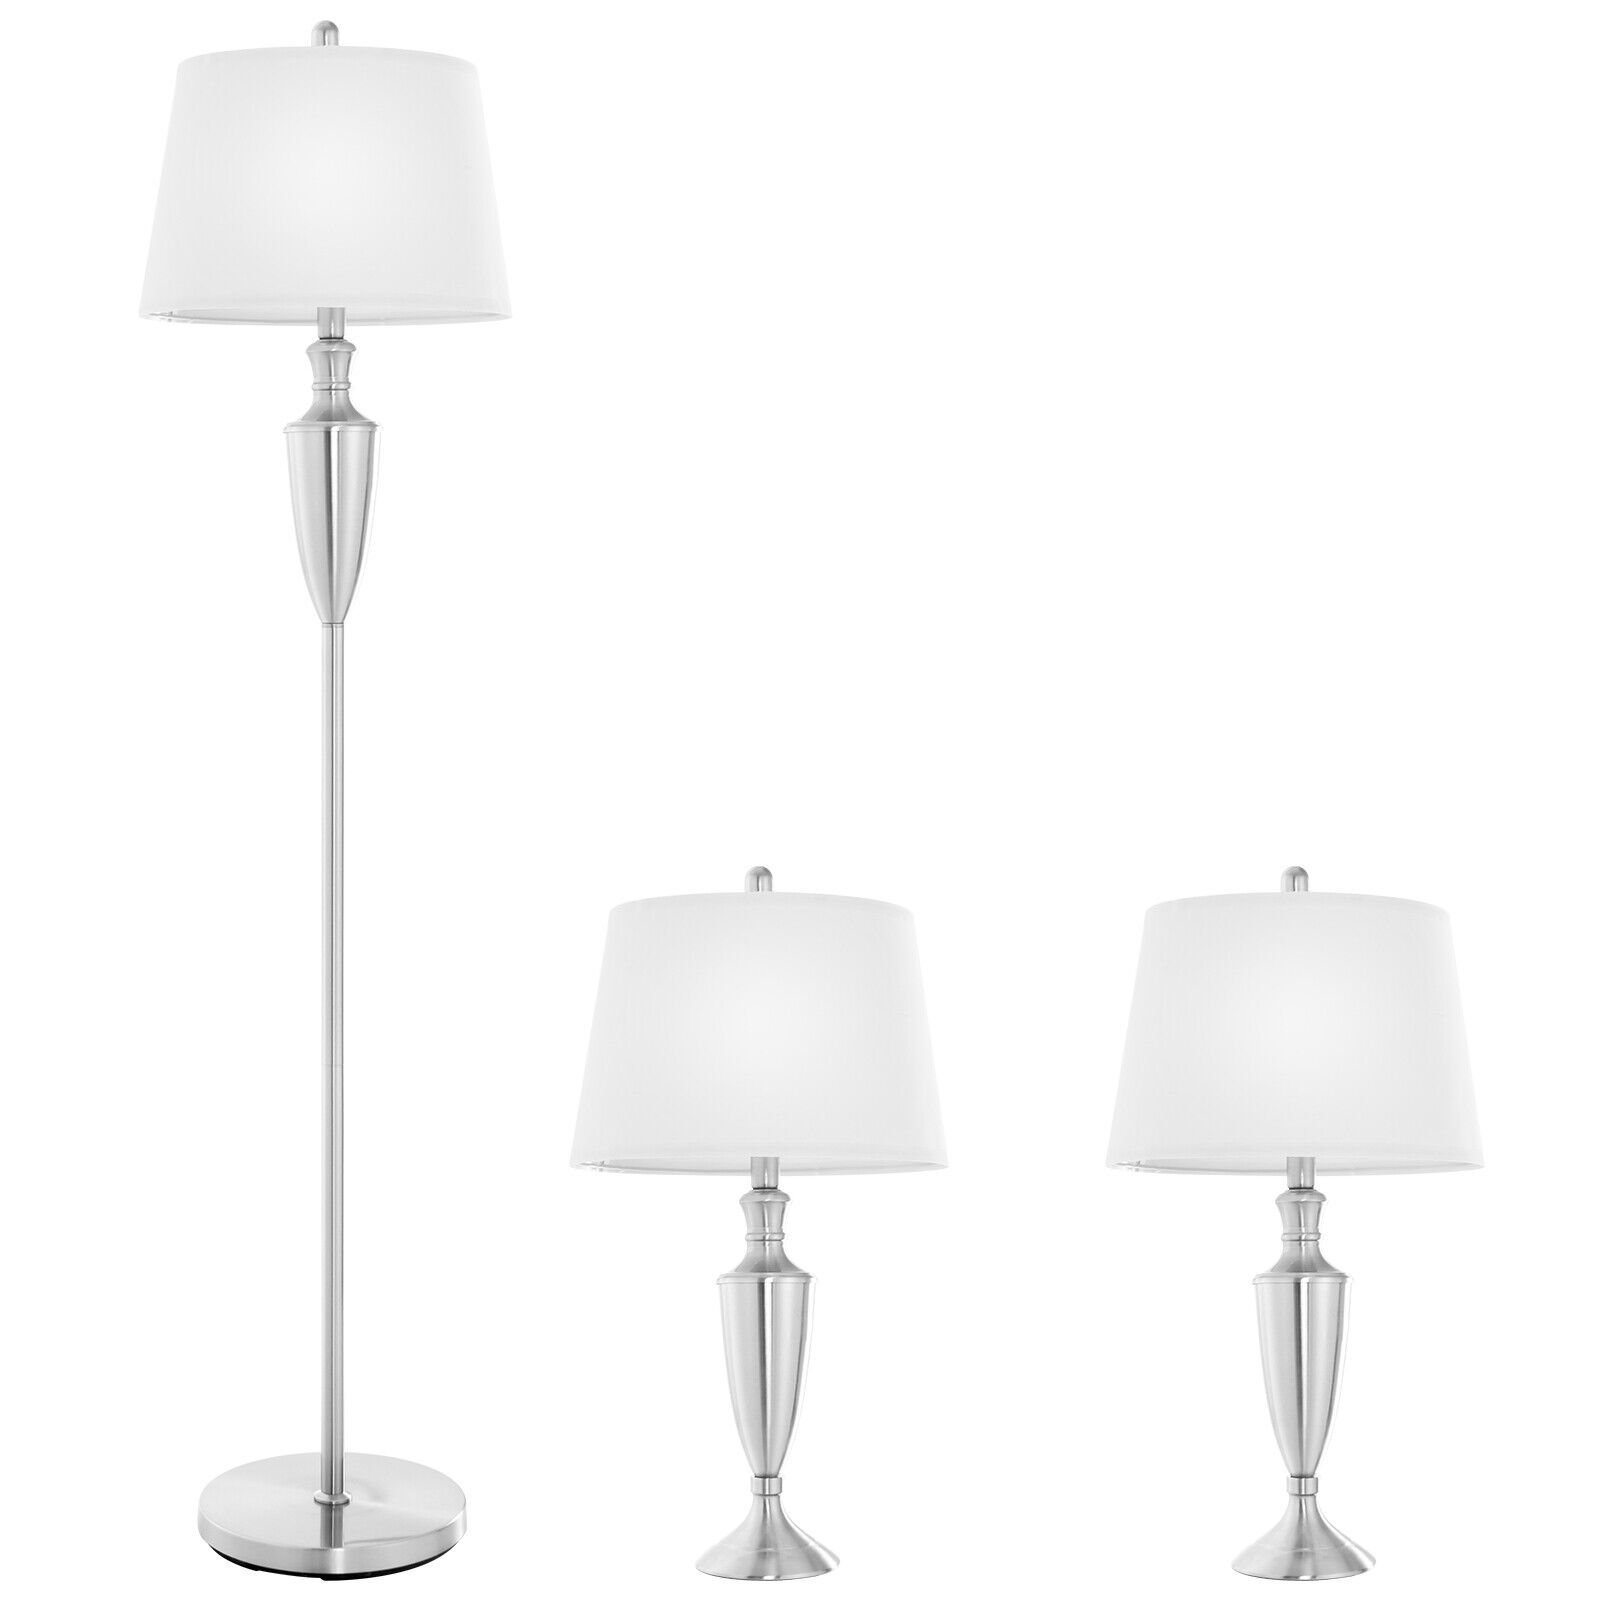 3 Piece Lamp Set Modern Floor Lamp & 2 Table Lamps Nickel Finish Lamps W/  Base | Ebay With Regard To 3 Piece Set Floor Lamps (View 10 of 15)